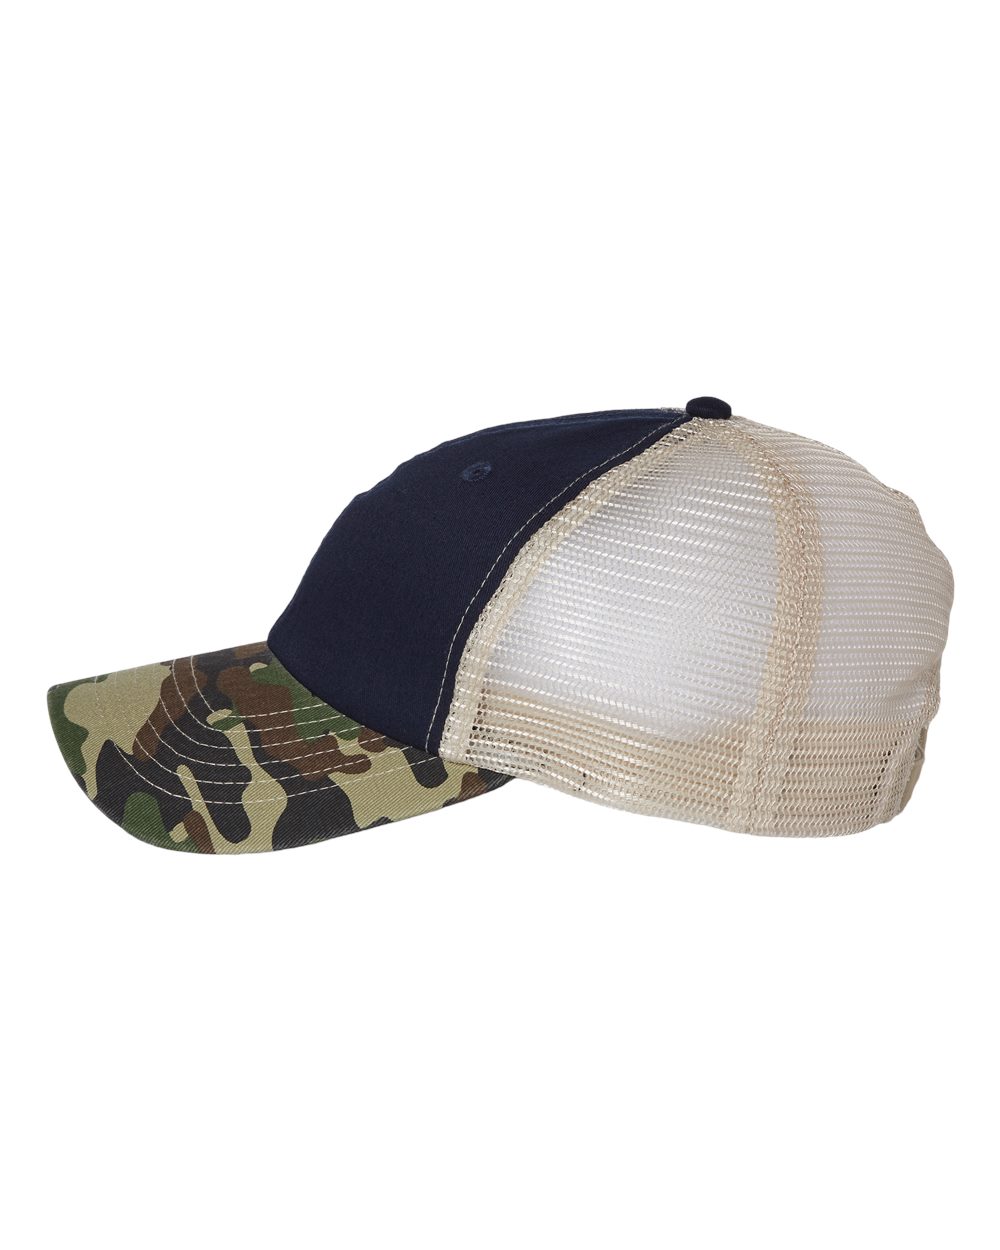 click to view Navy/ Camo/ Stone